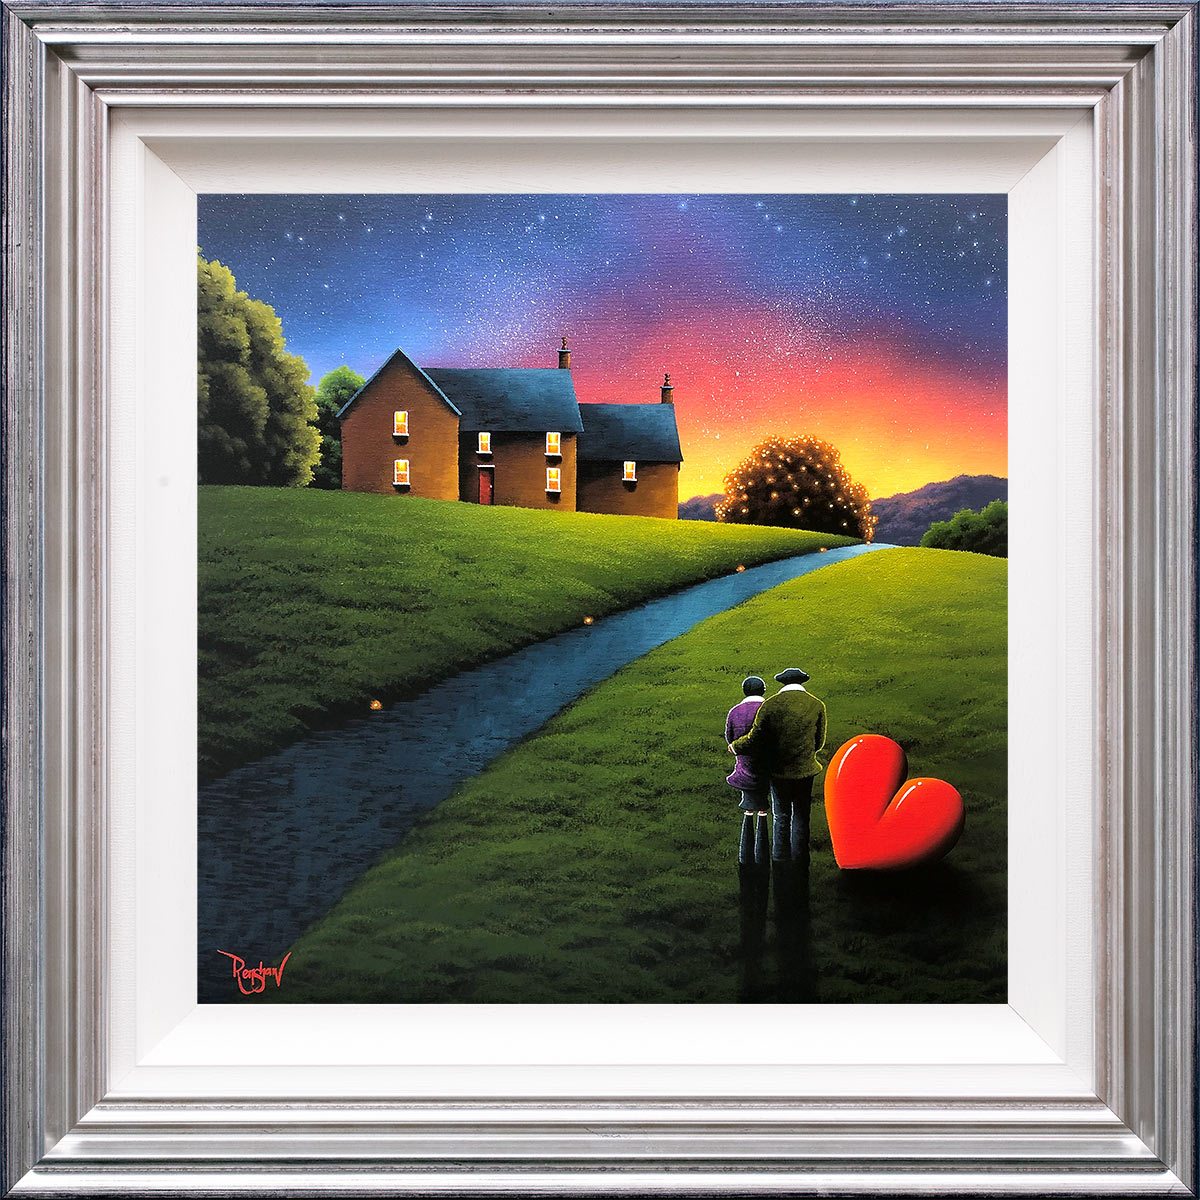 Besotted by You - Original David Renshaw Framed